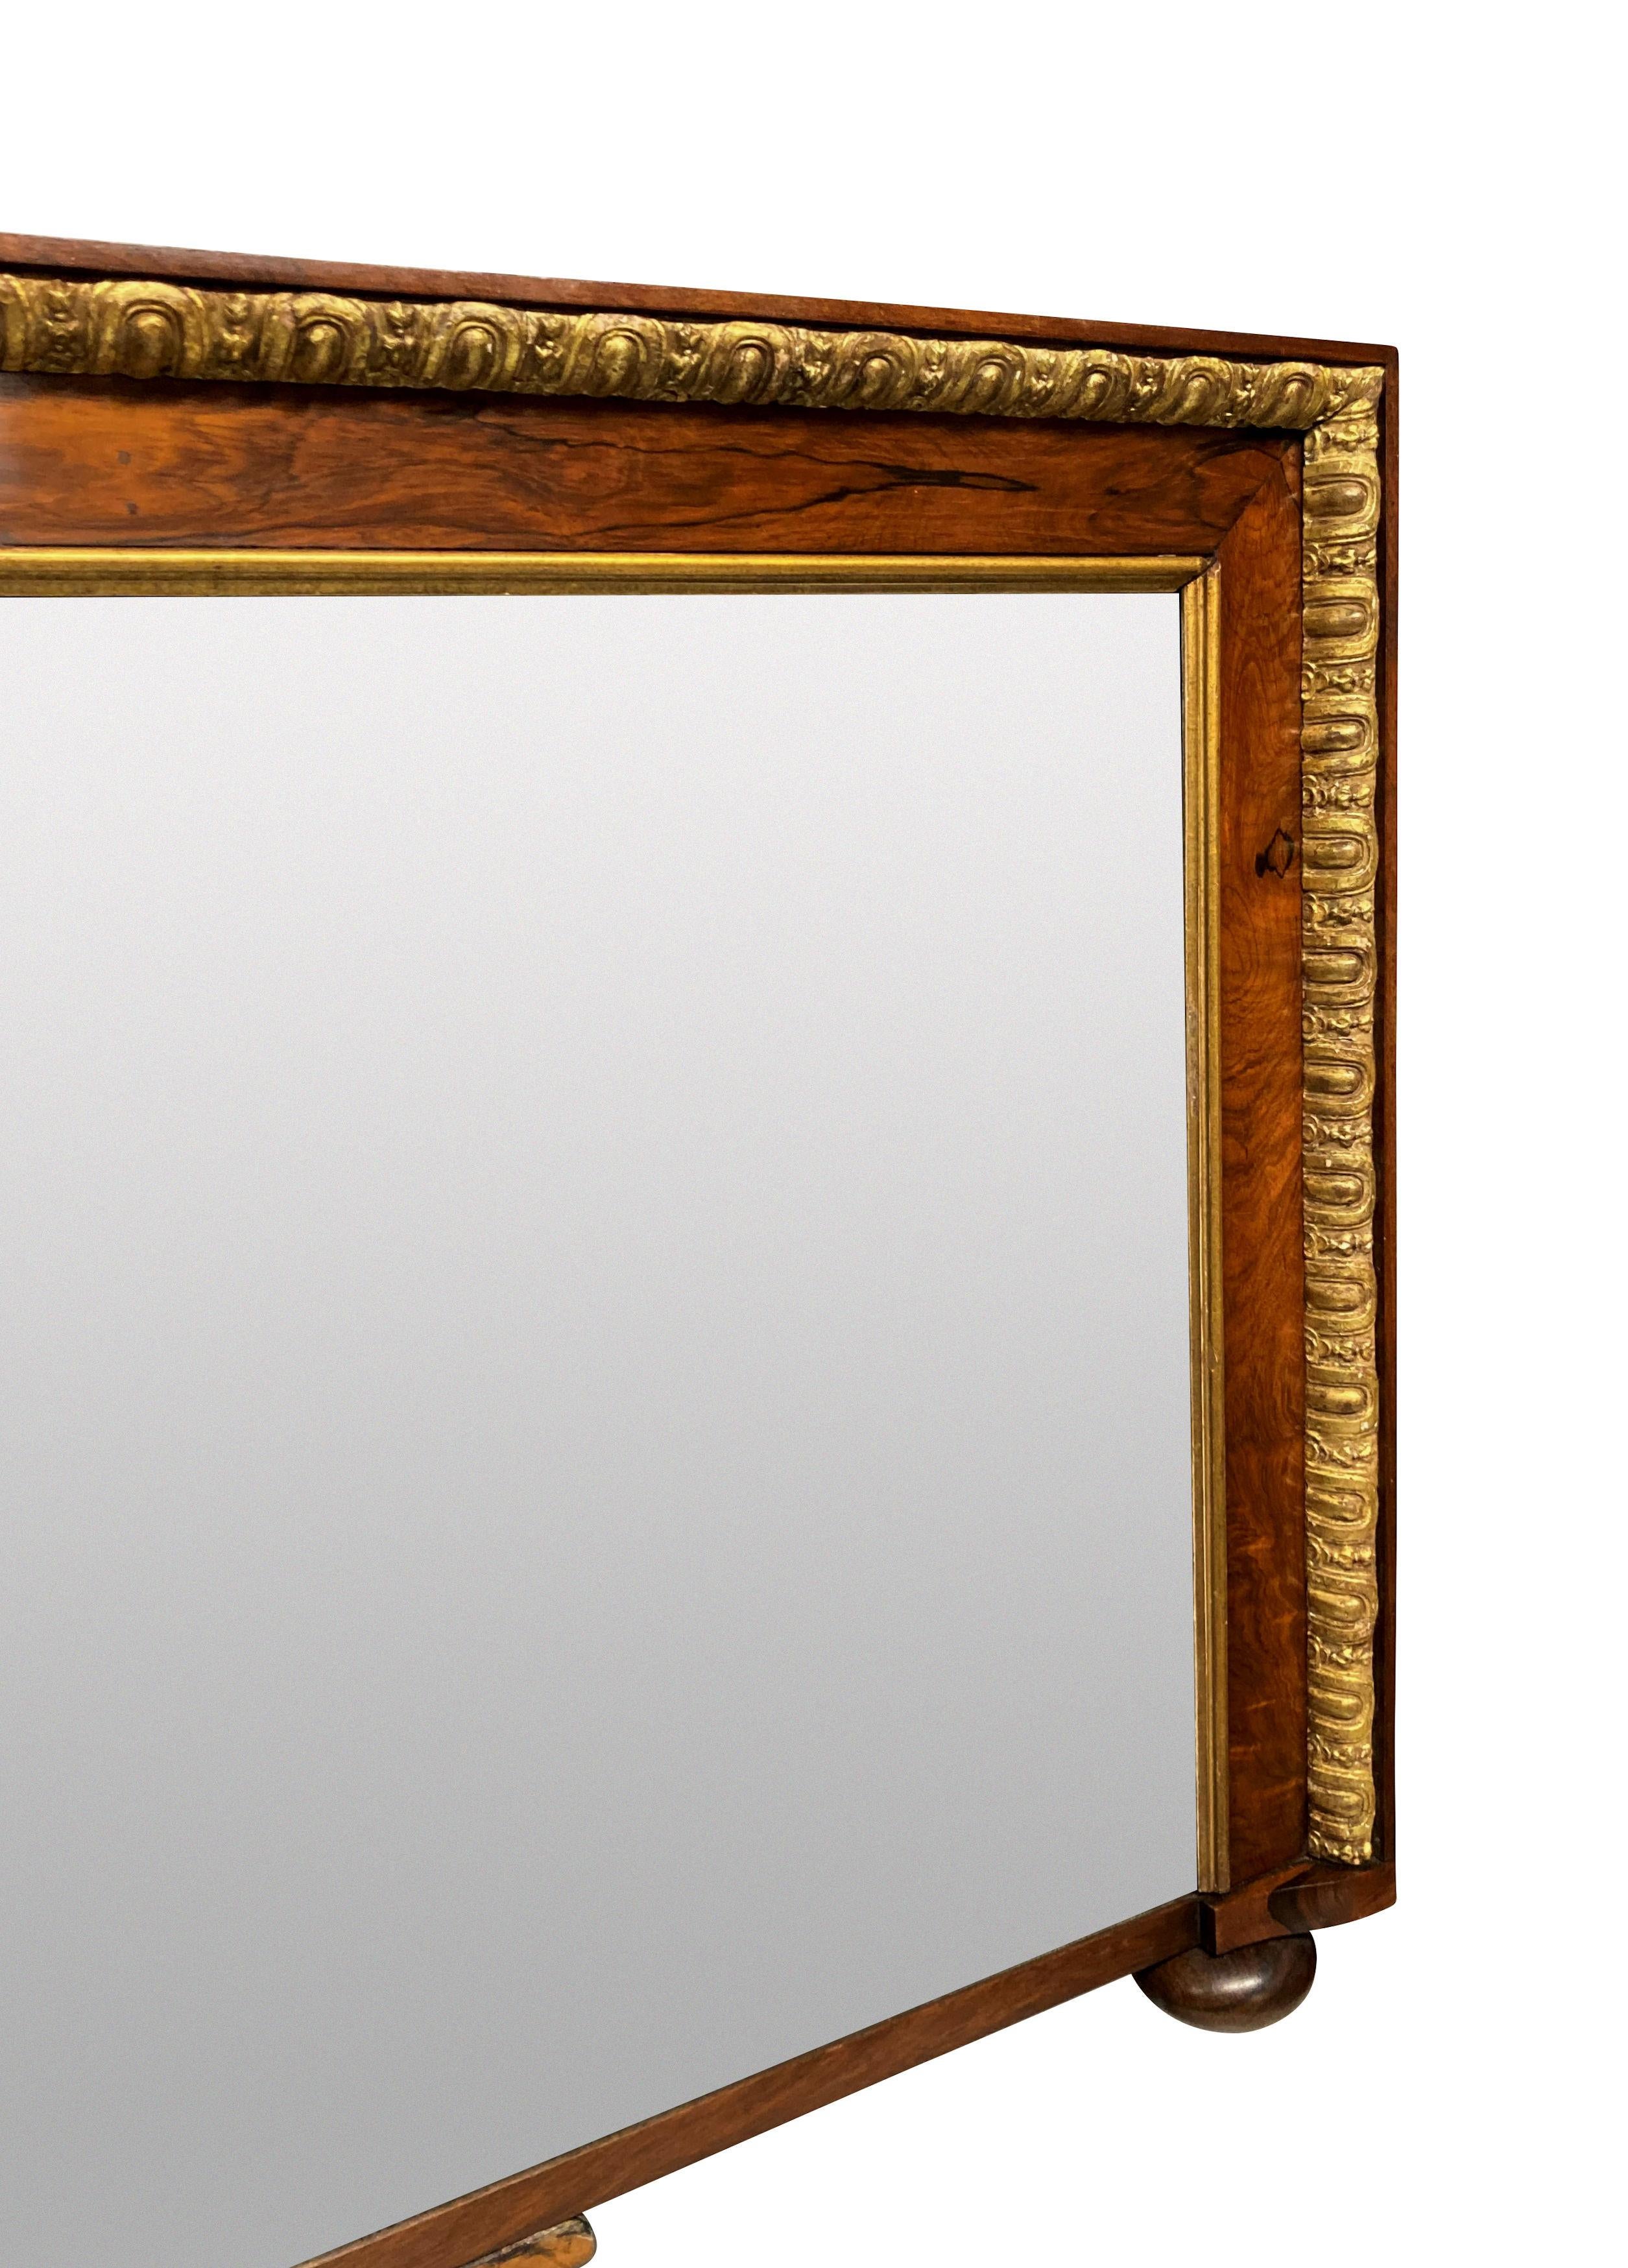 An English George II beautifully figured walnut and parcel gilt overmantle mirror, with a foxed mercury plate and on bun feet.